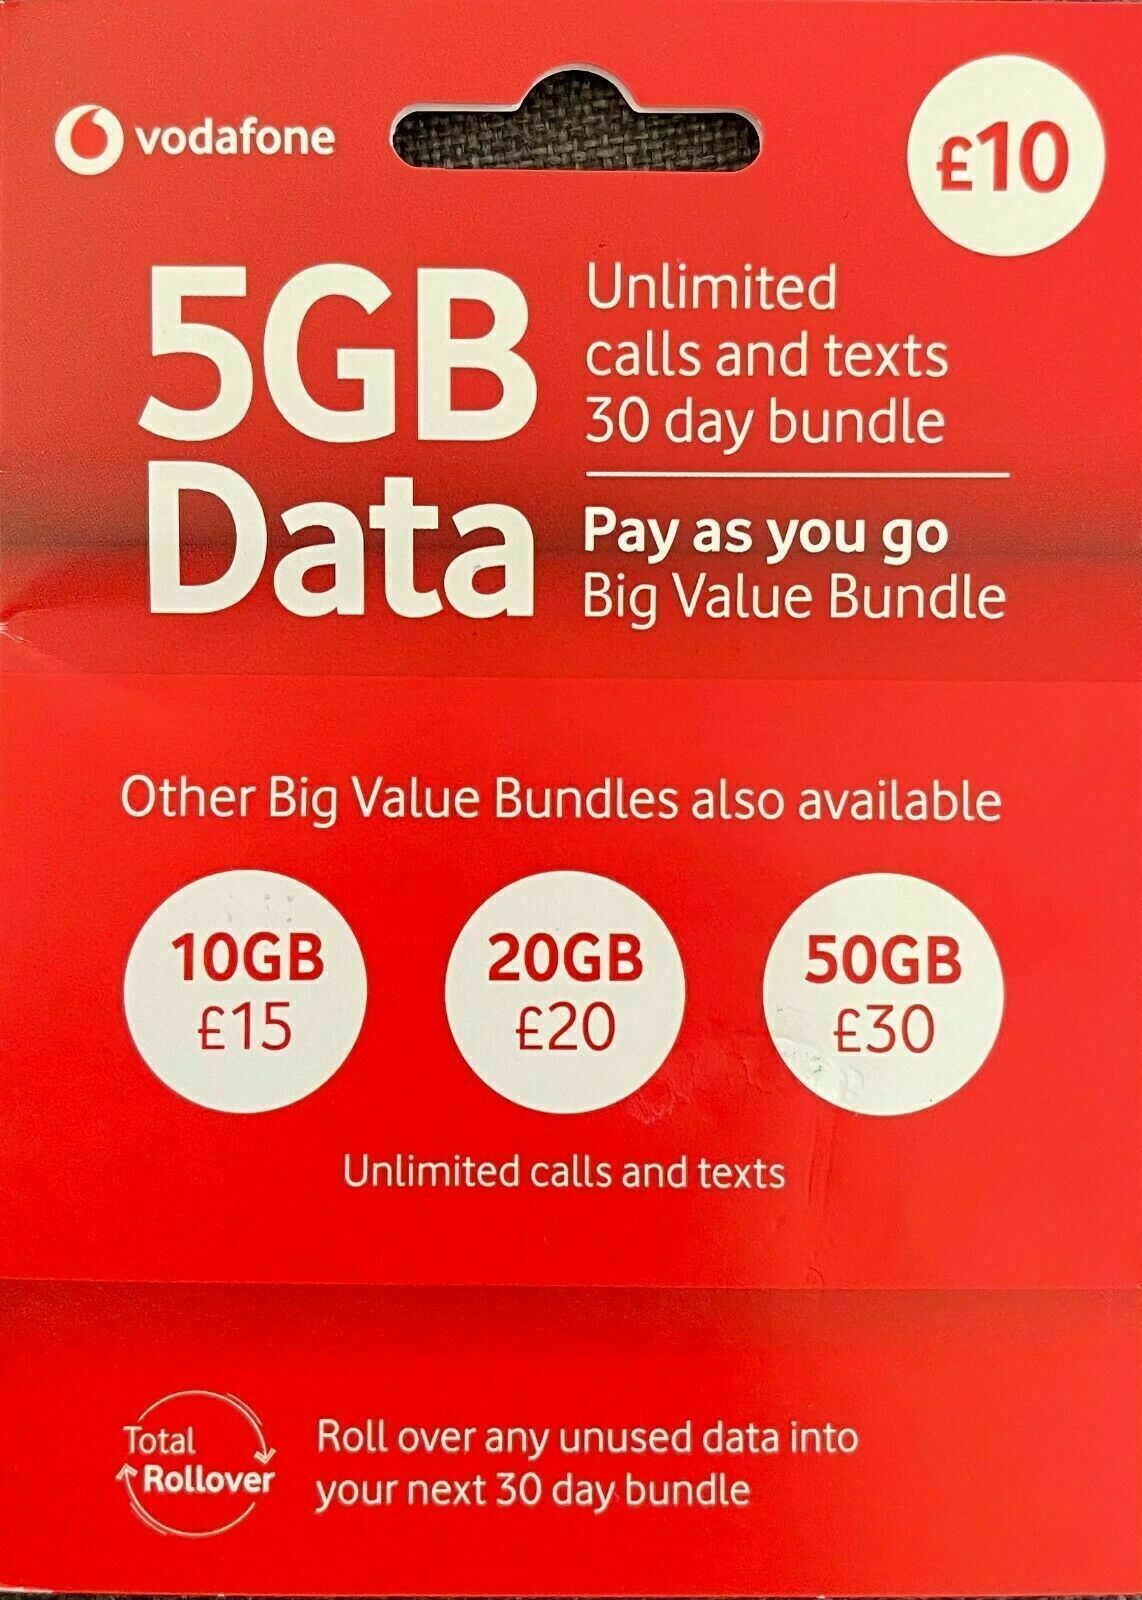 Vodafone Sim Card Package Included Unlimited Data Calls SMS Pay As you Go - £10-5GB Data Unlimited Calls & Text